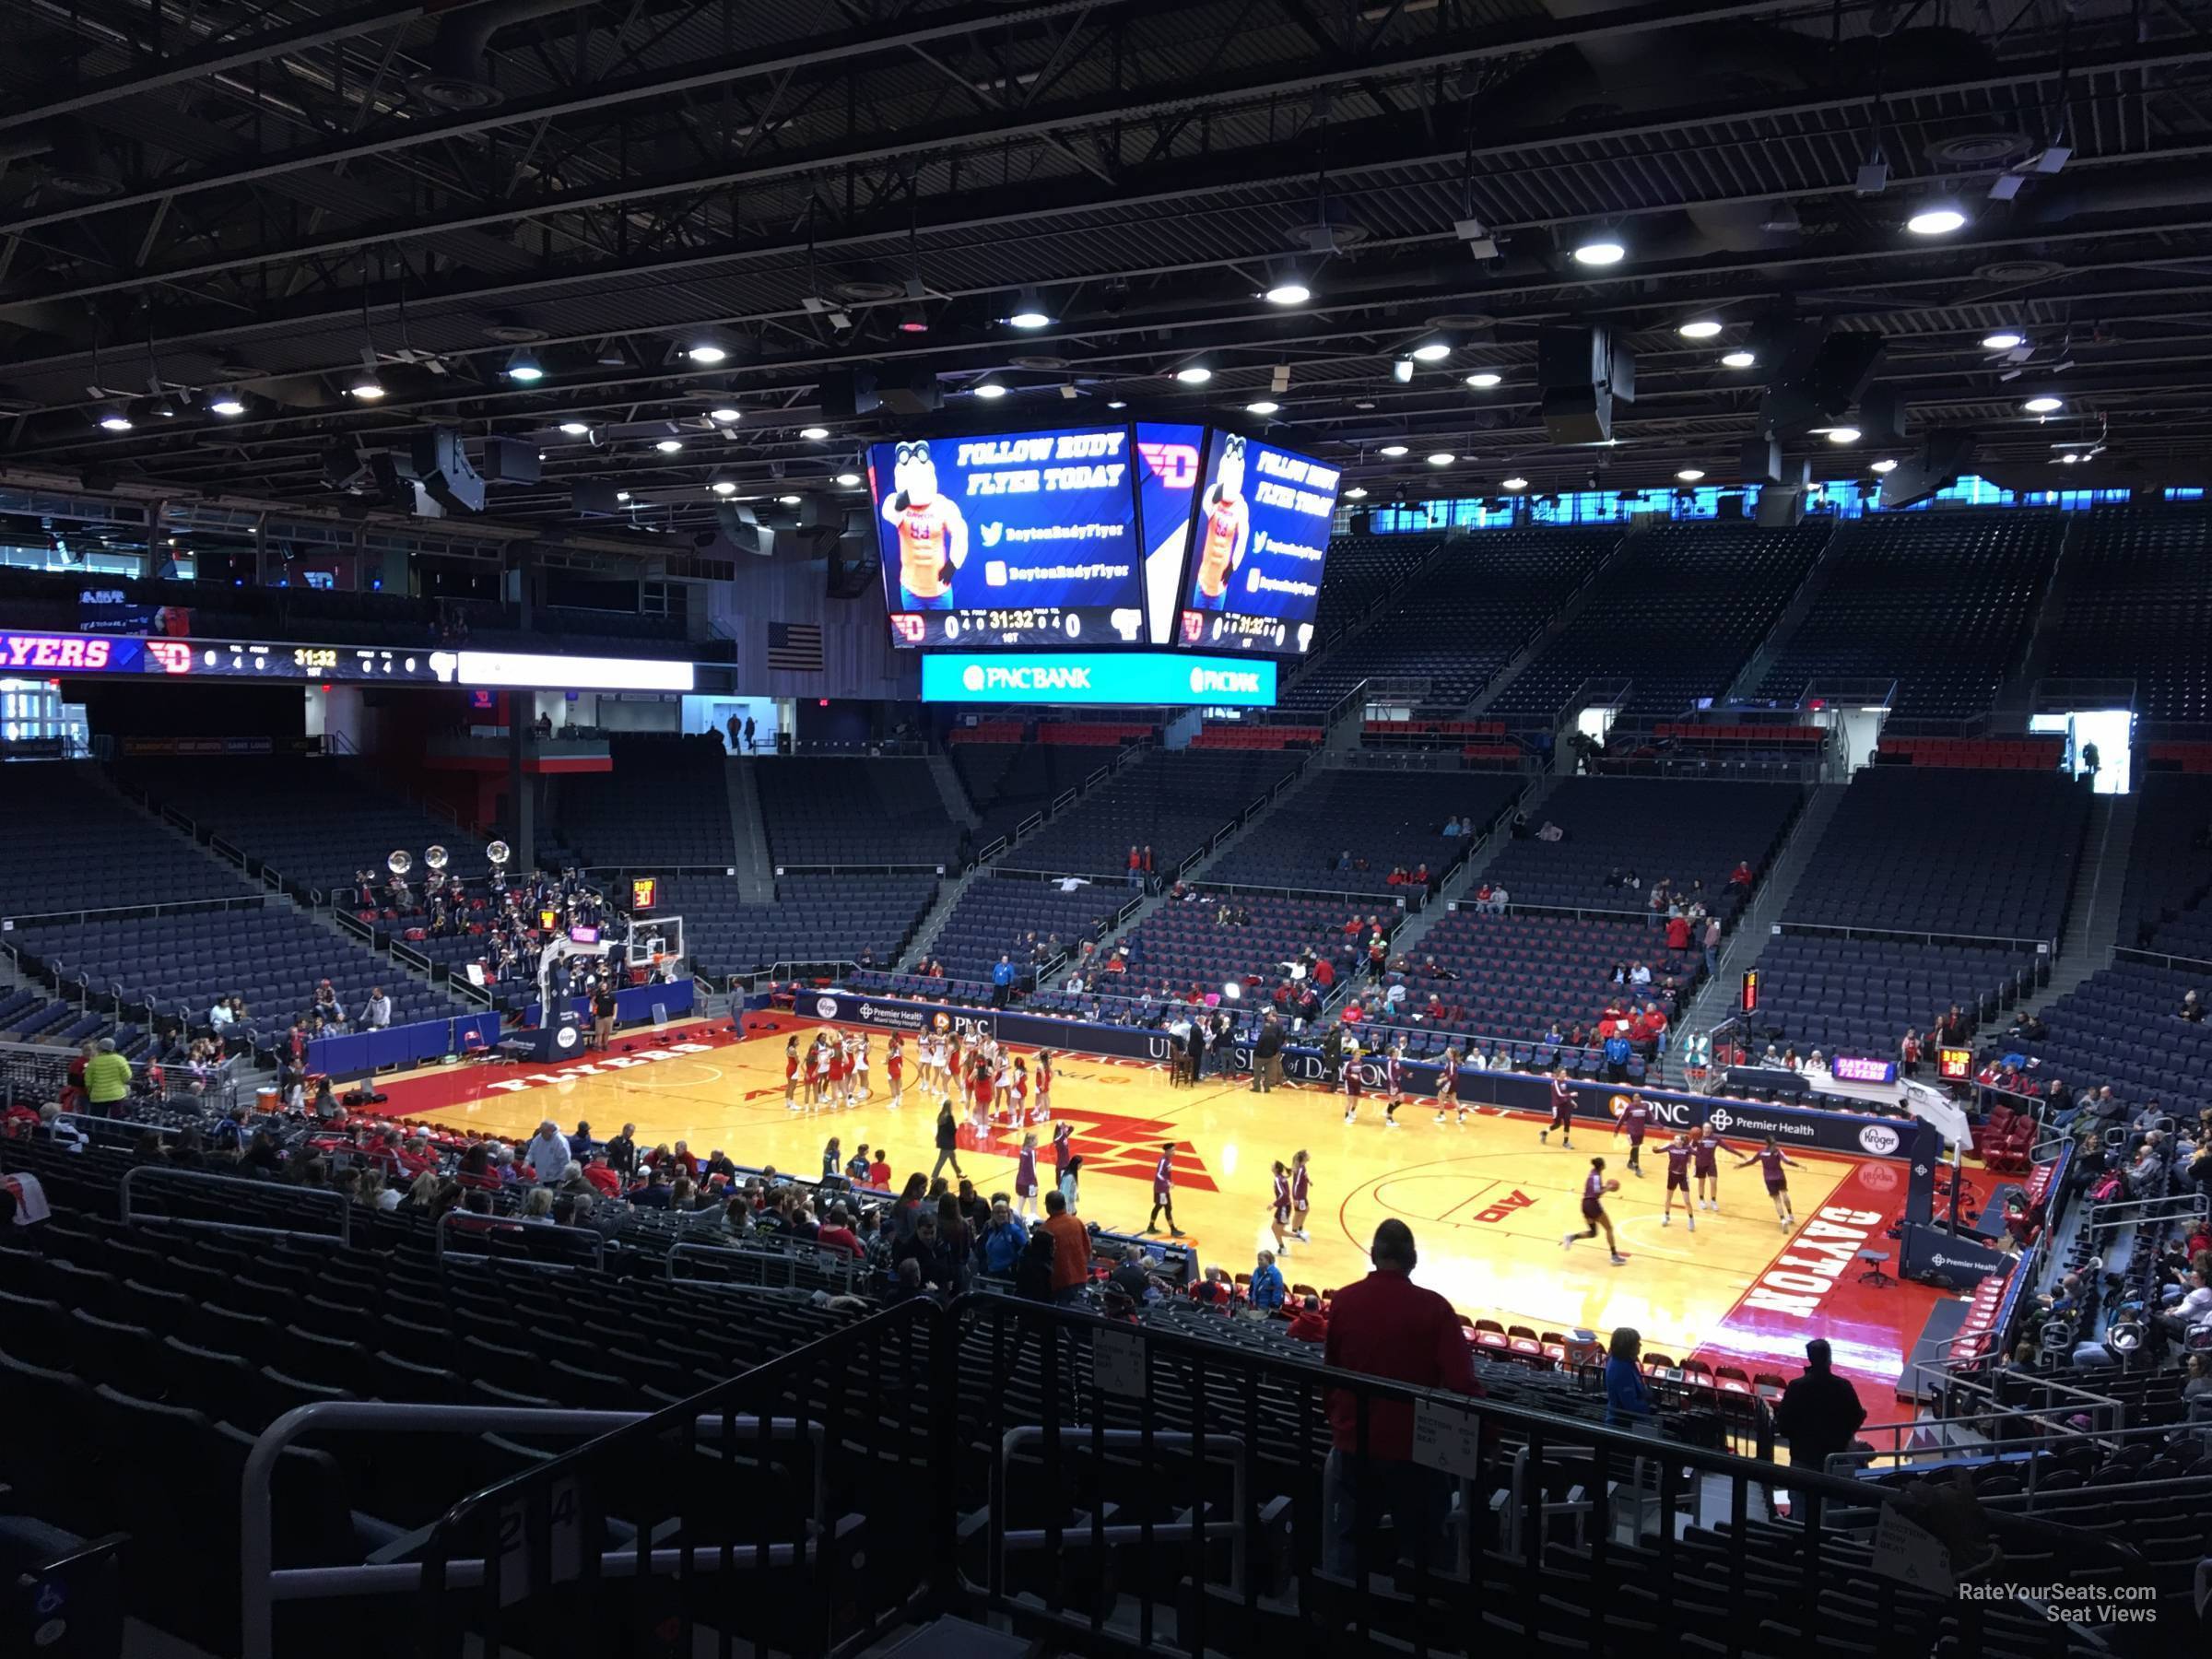 section 301, row a seat view  - university of dayton arena